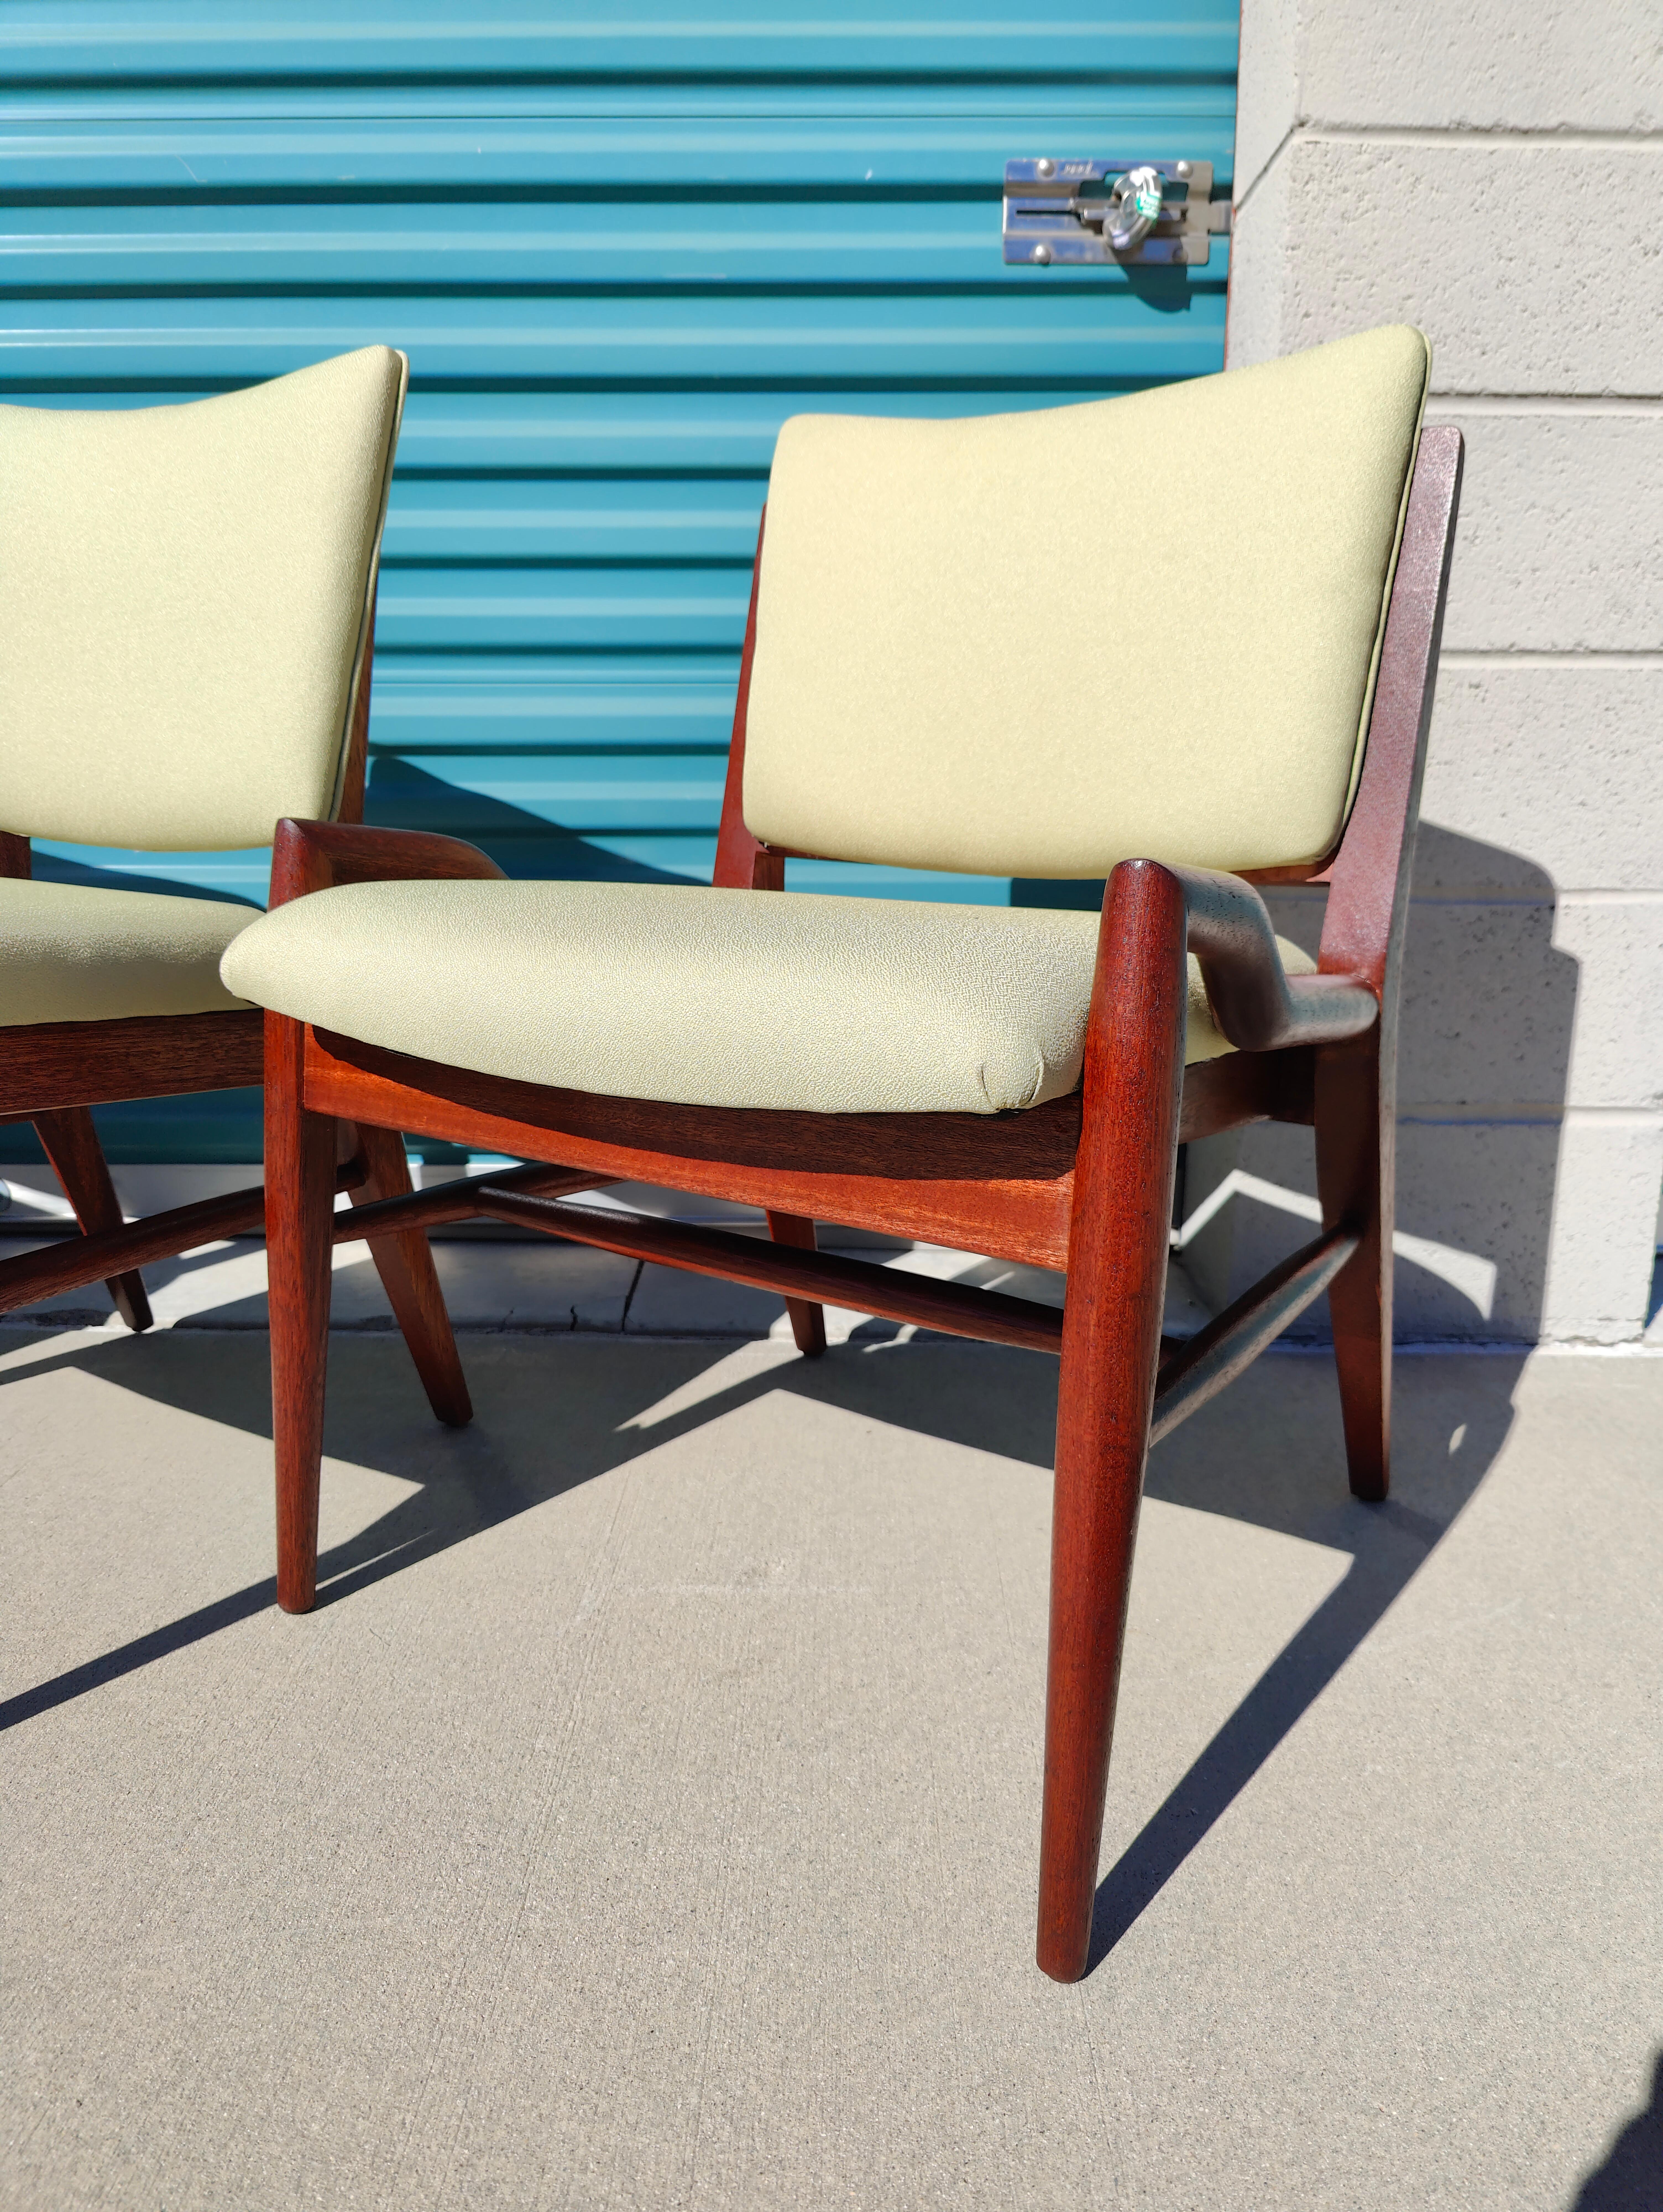 Vintage Mid-Century Modern Mahogony Chairs by Brown Saltman For Sale 6